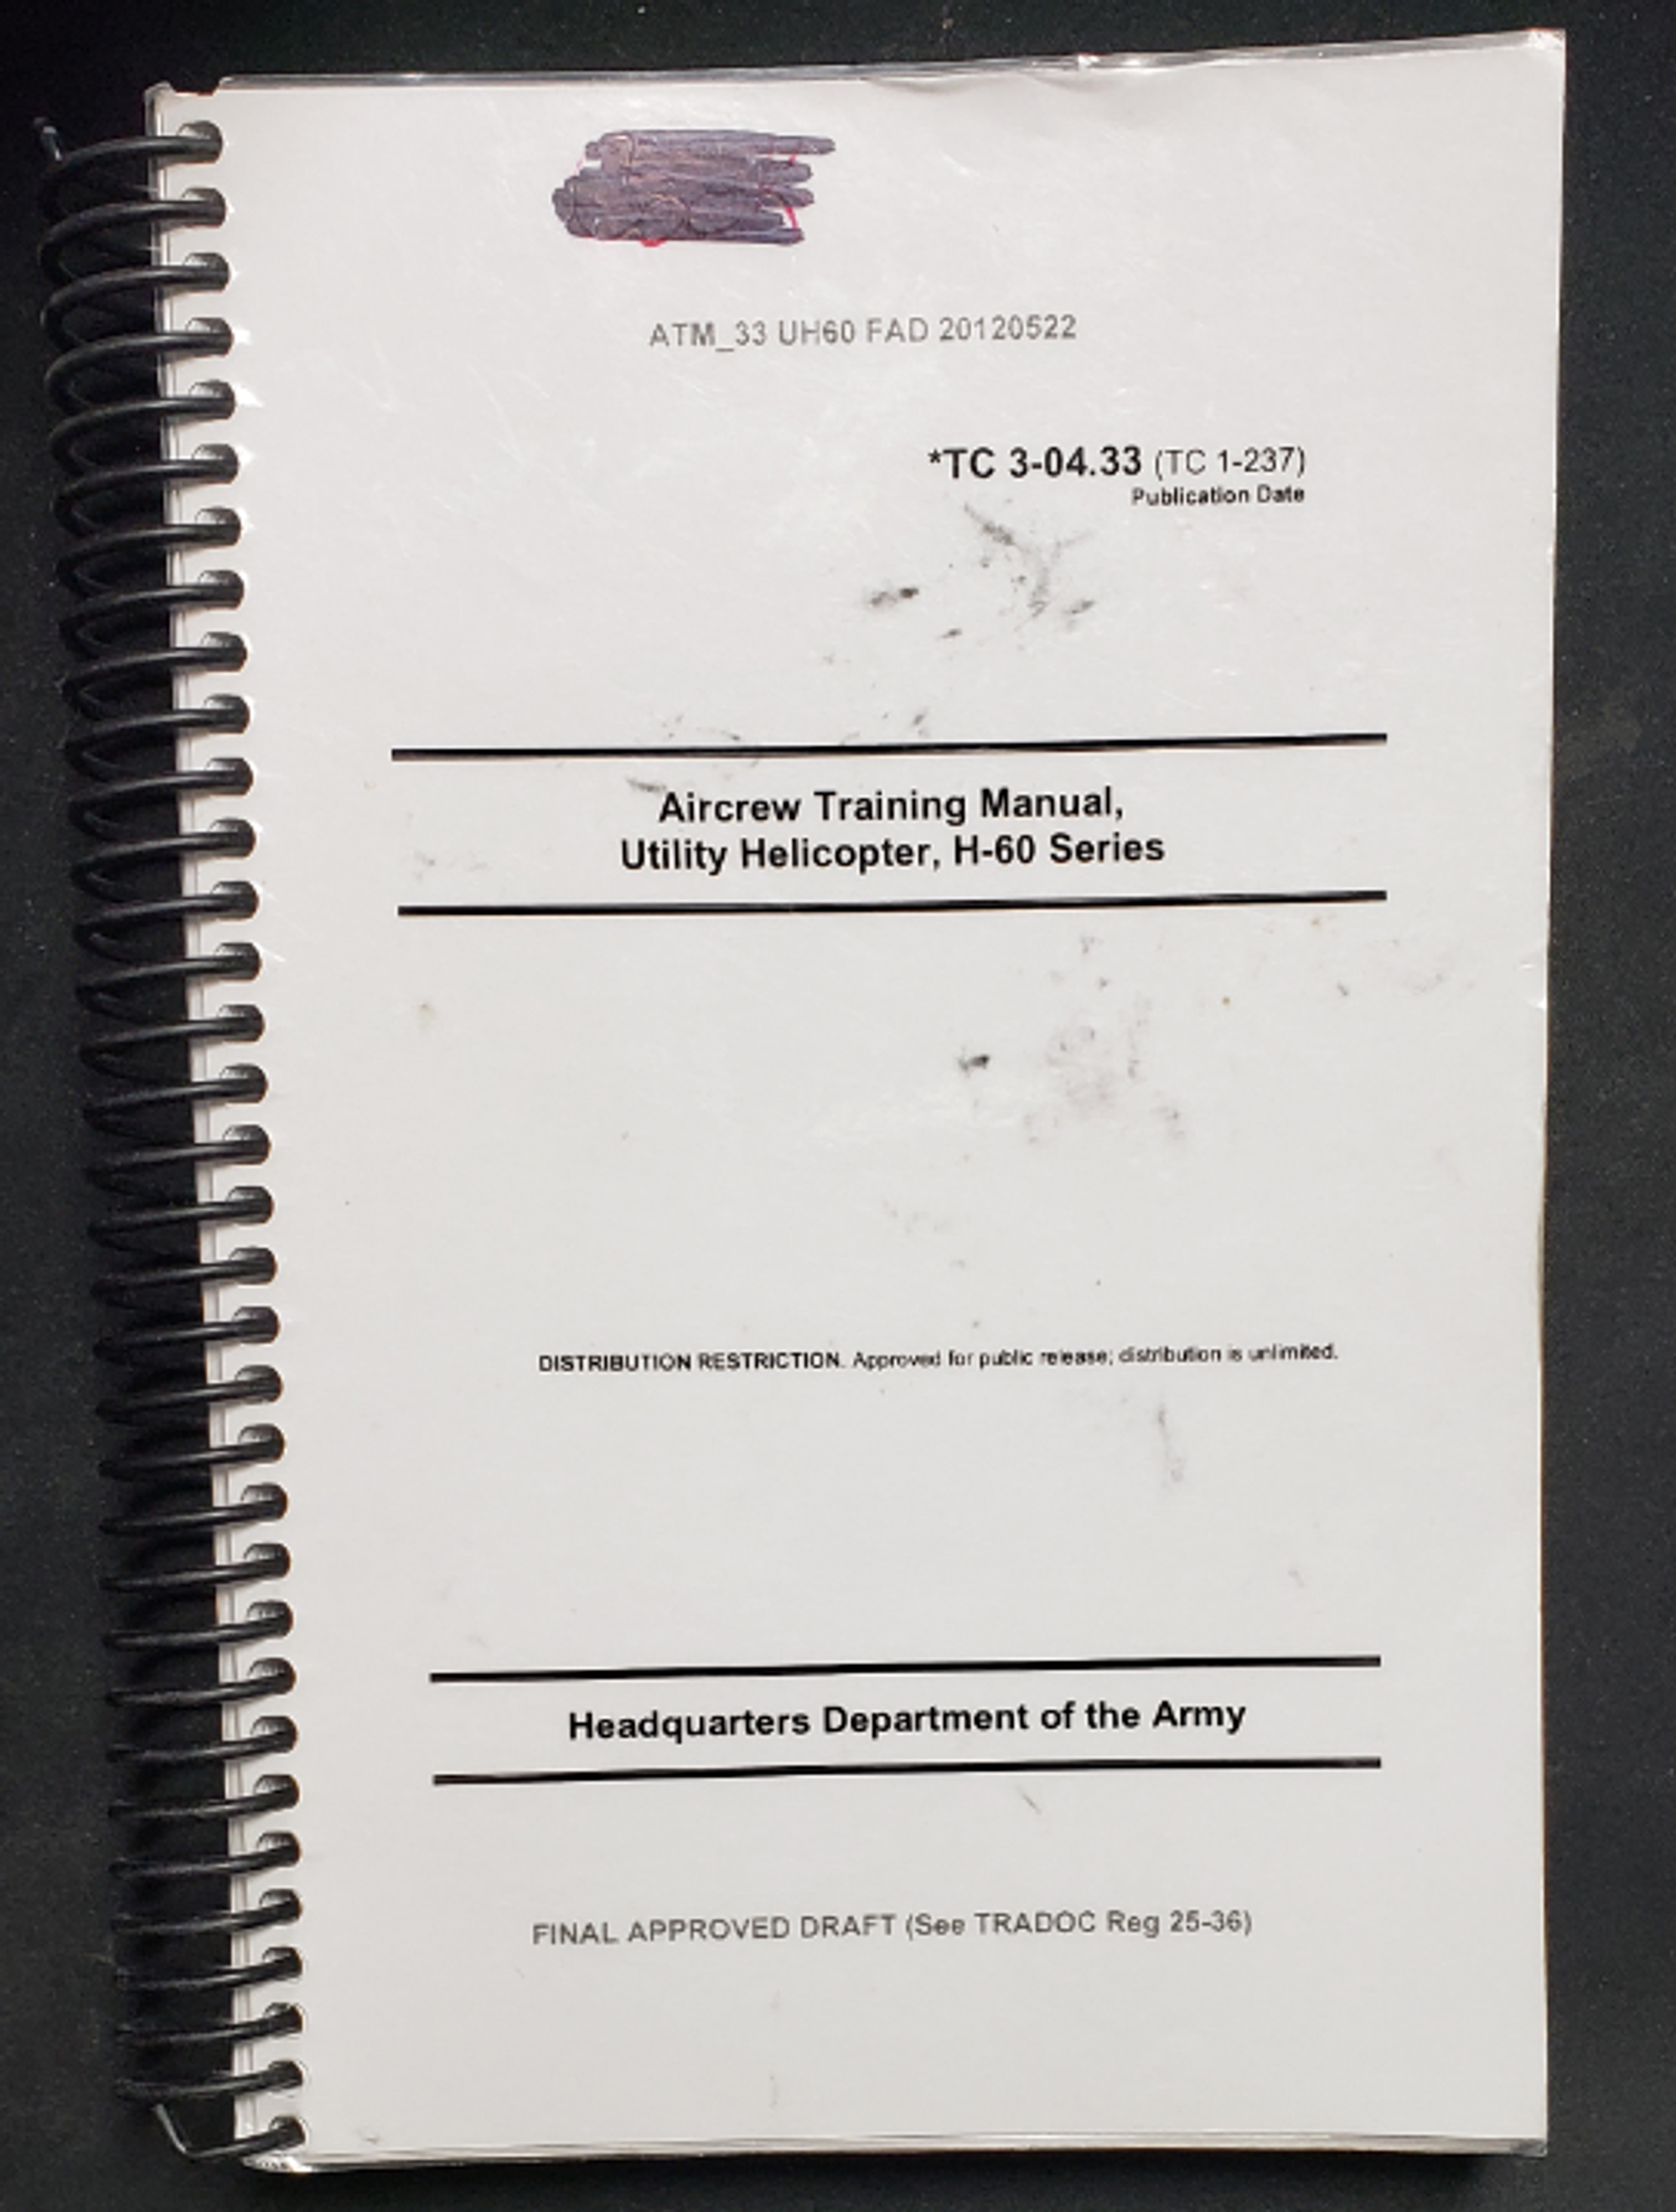 US Armed Forces Field Manual - Aircrew Training Manual Utility Helicopter (2012)